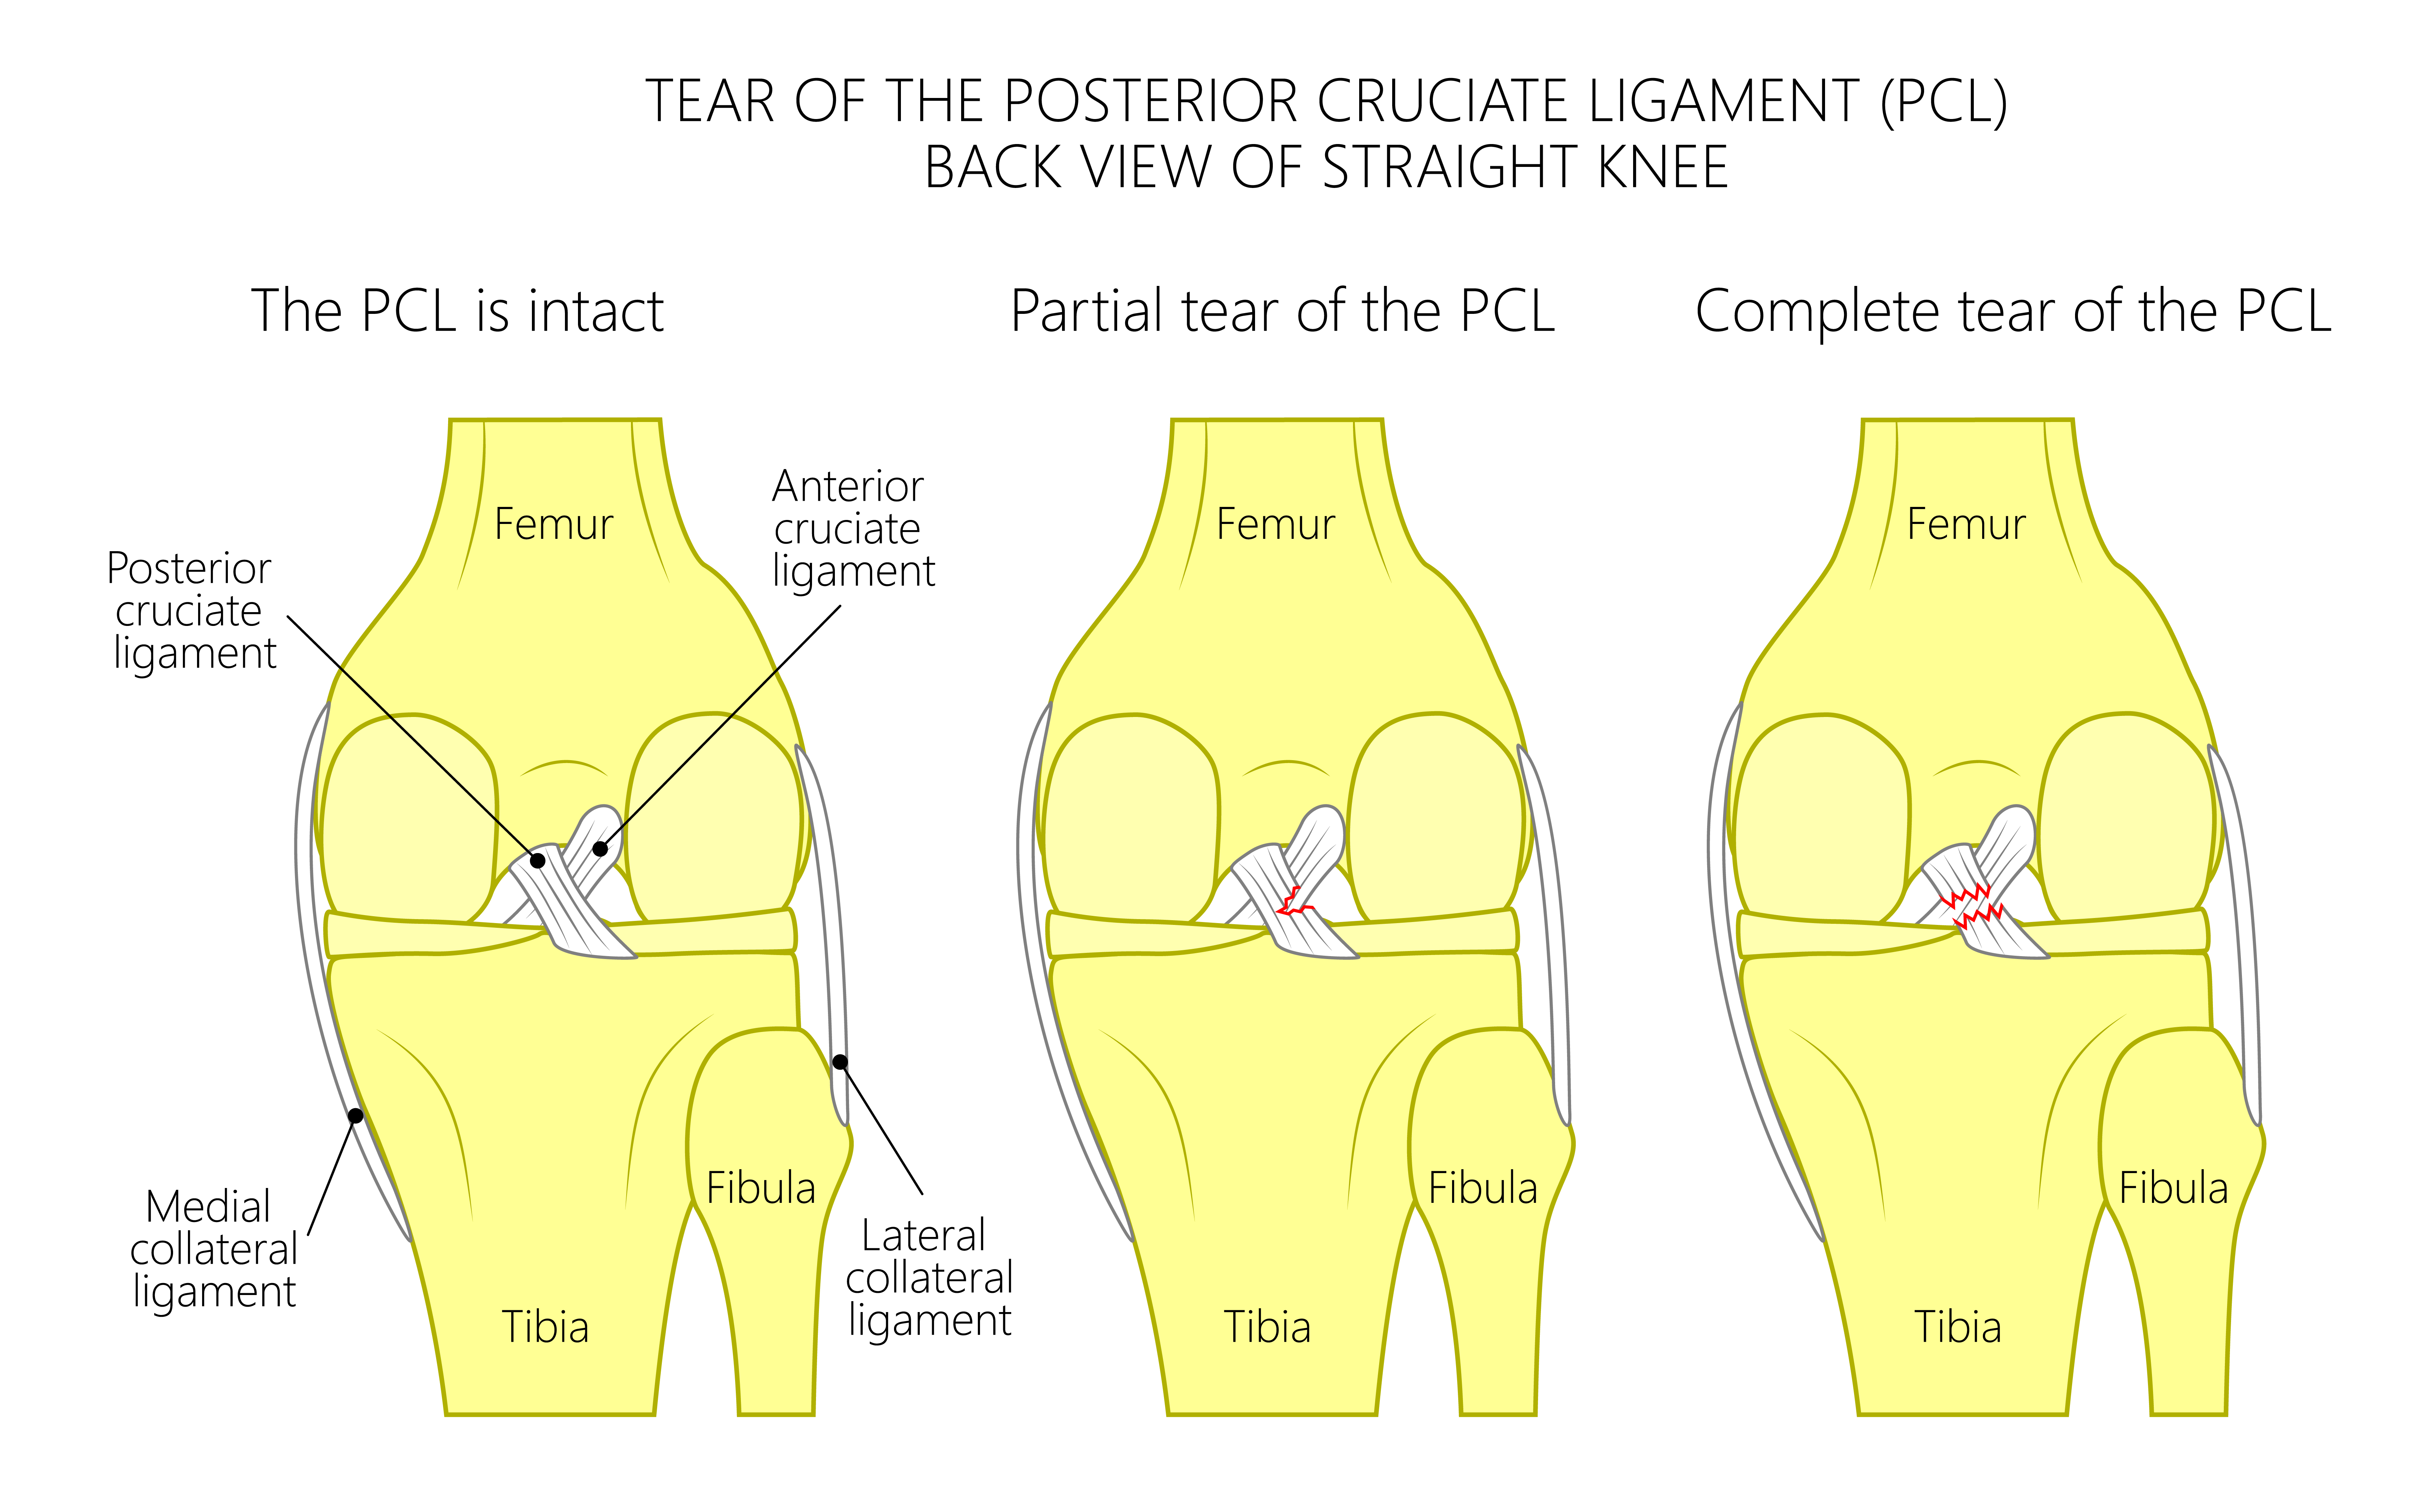 Anterior Cruciate Ligament Tear (ACL Tear) - The Institute for